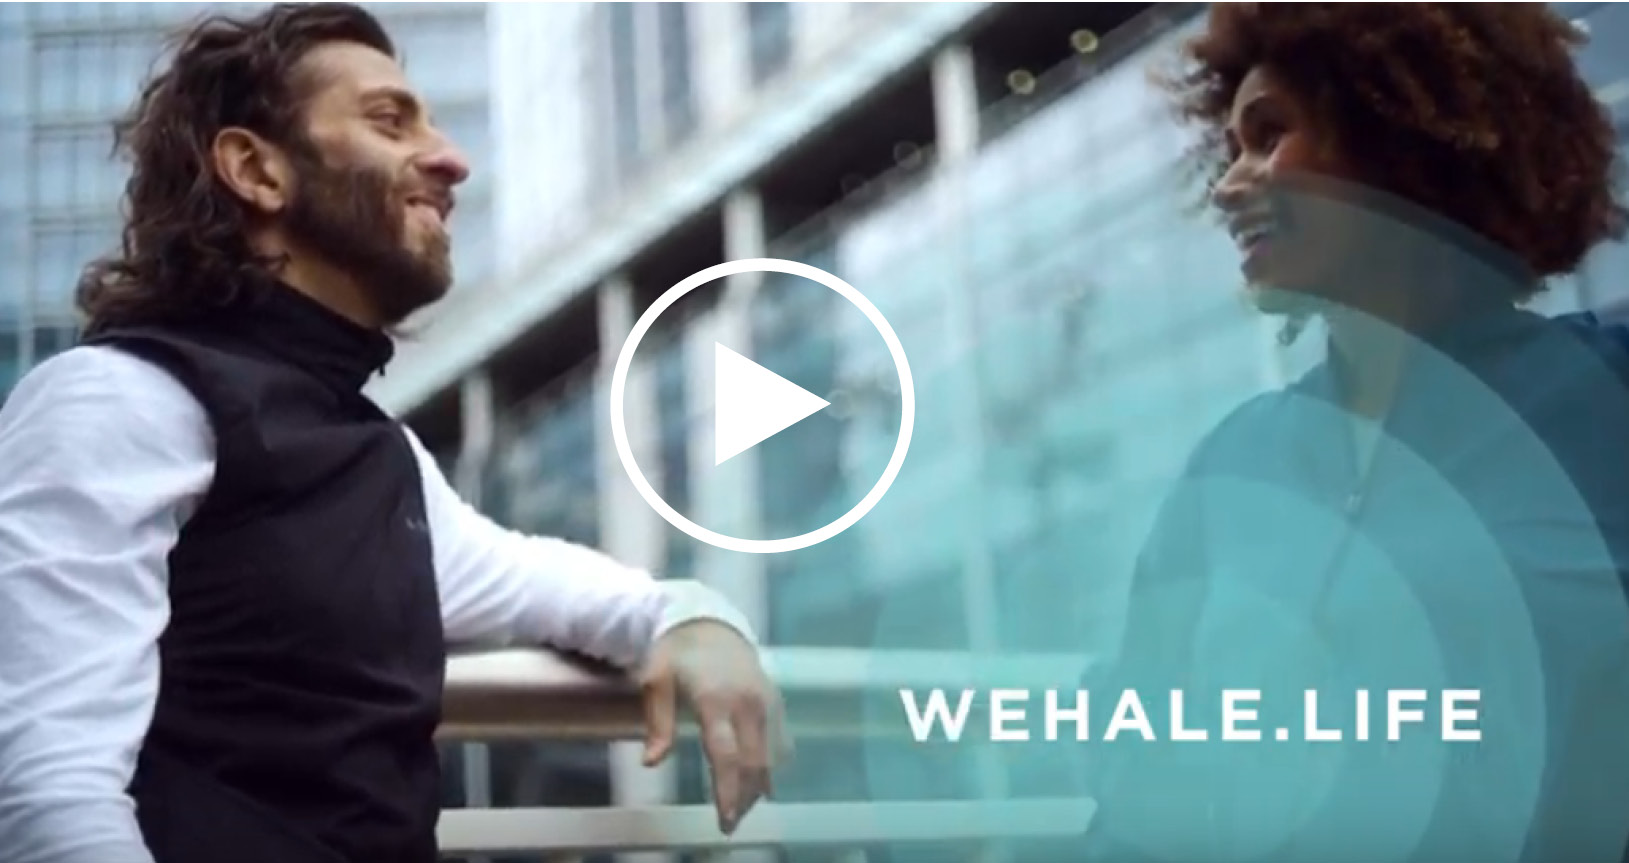 What is wehale.life